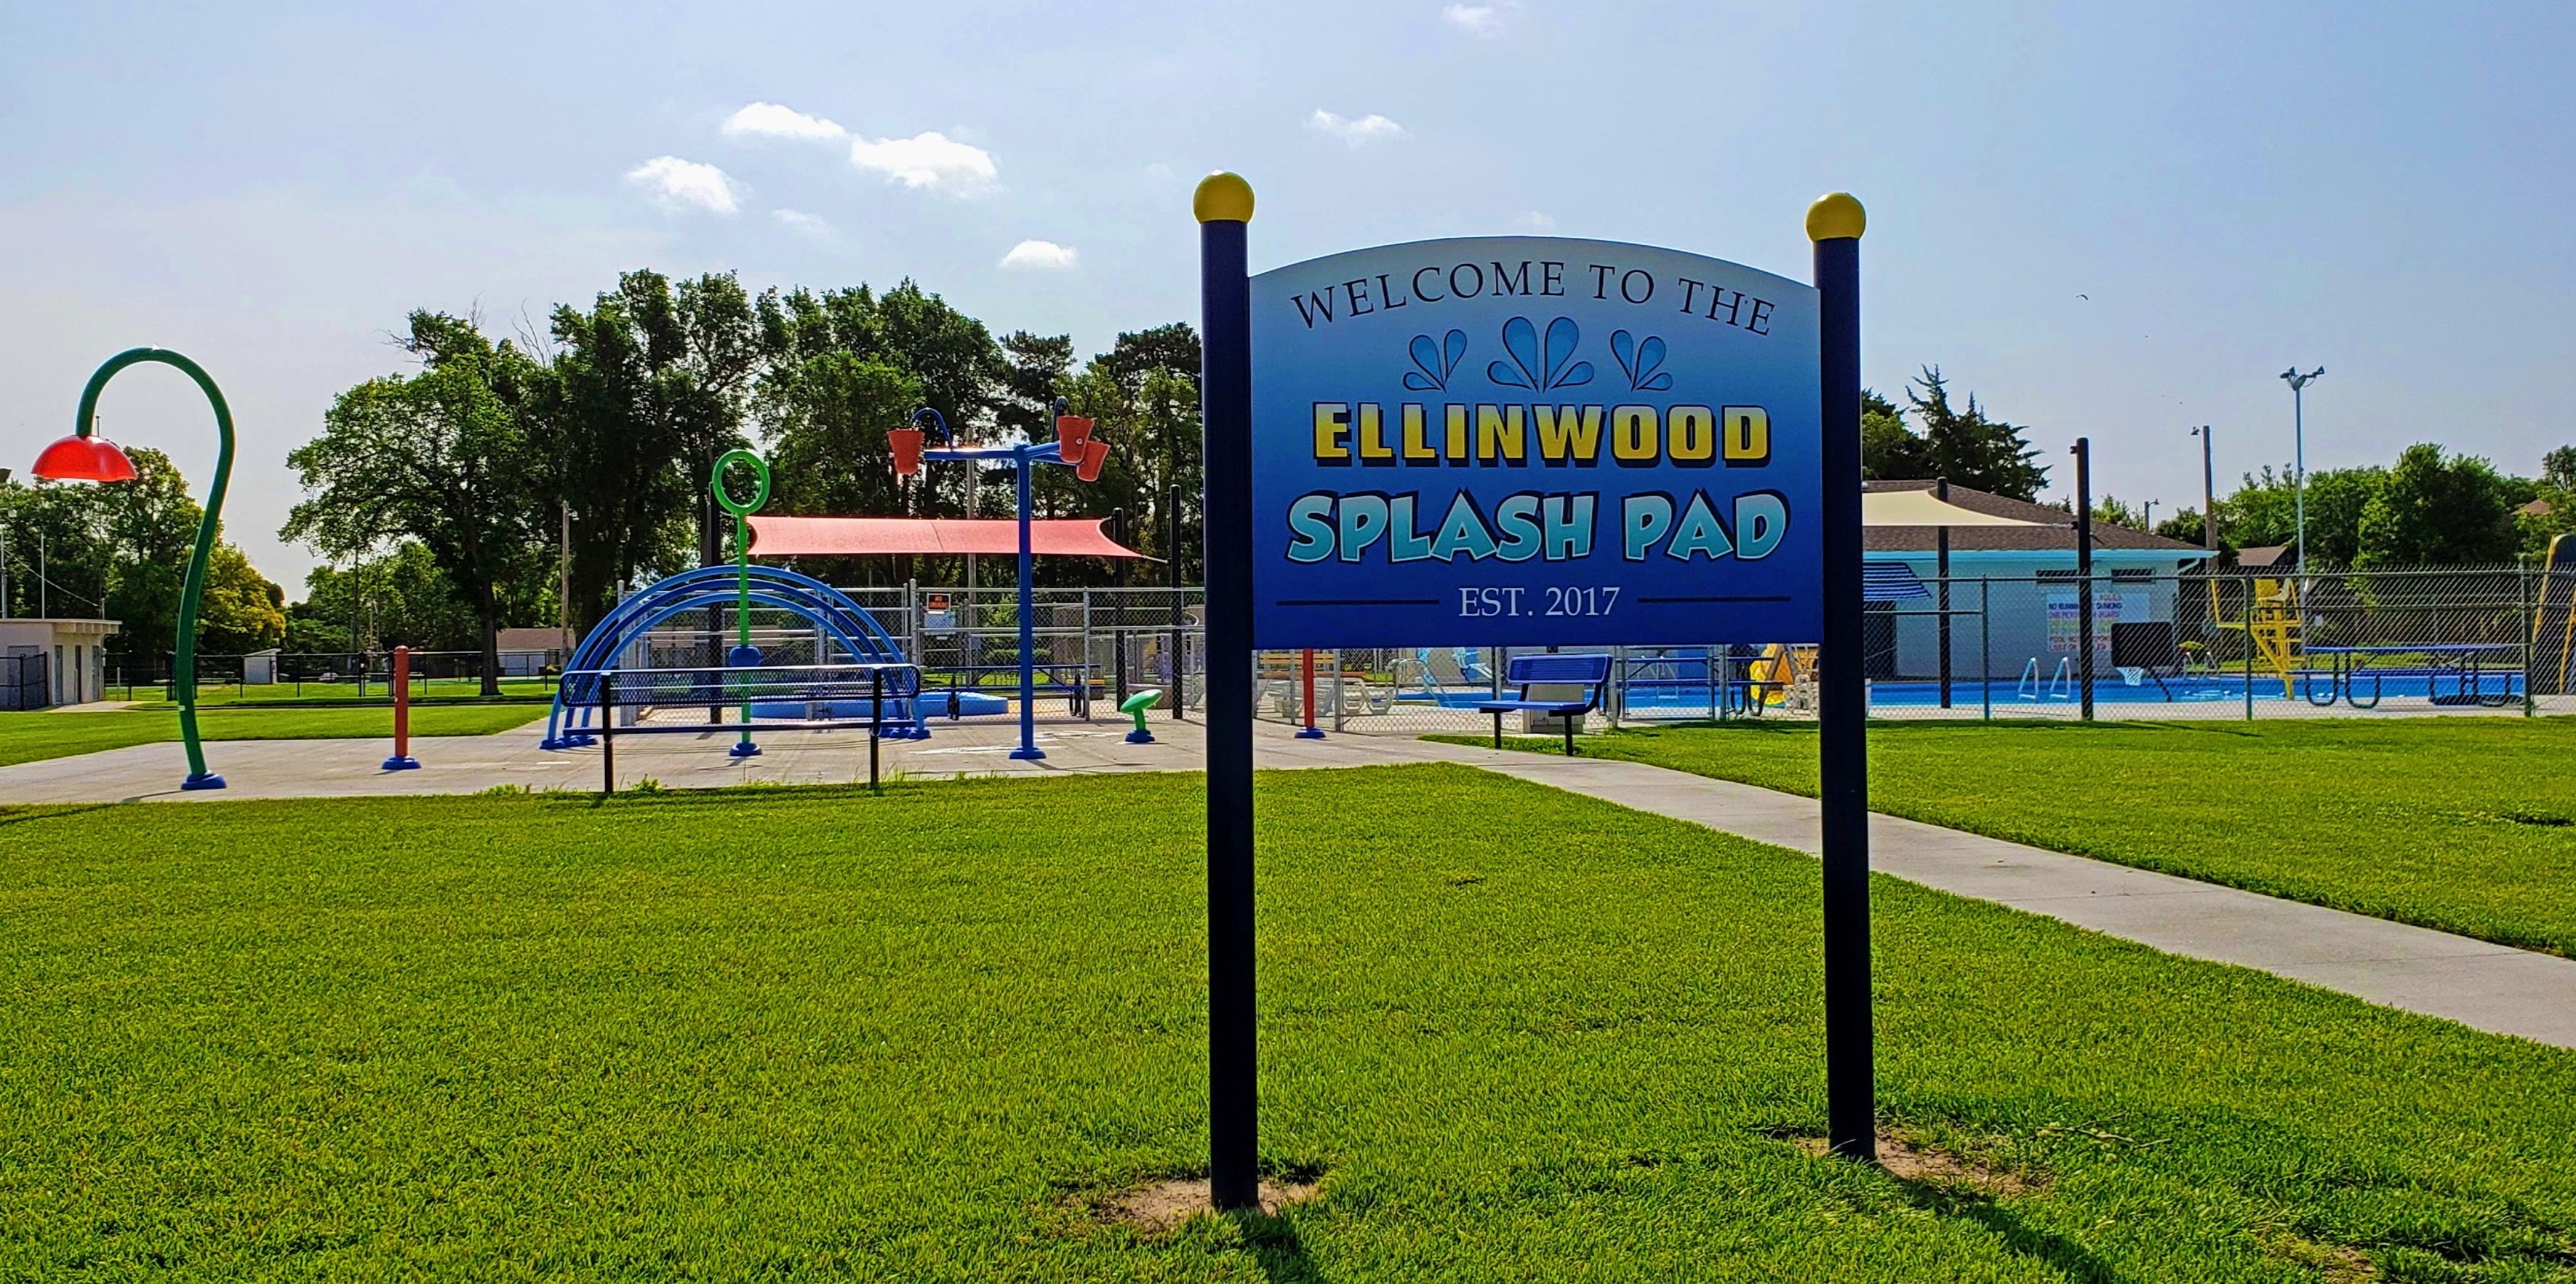 A sign in the foreground reads, "Welcome to the Ellinwood Splash Pad. Established 2017". A splash pad and pool can be seen in the background.